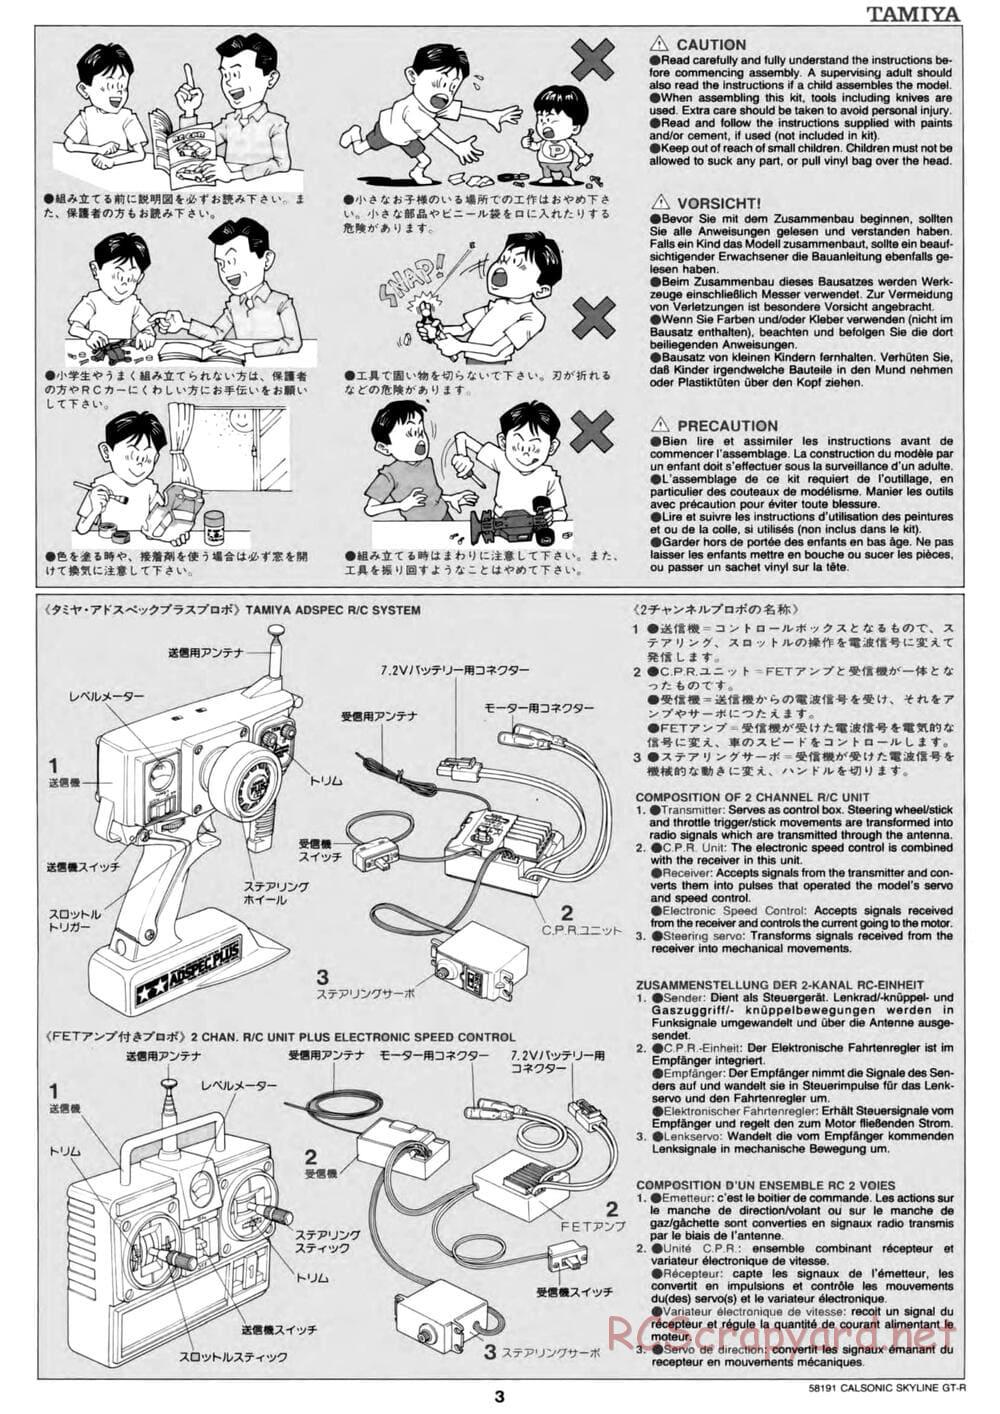 Tamiya - Calsonic Skyline GT-R - TL-01 Chassis - Manual - Page 3